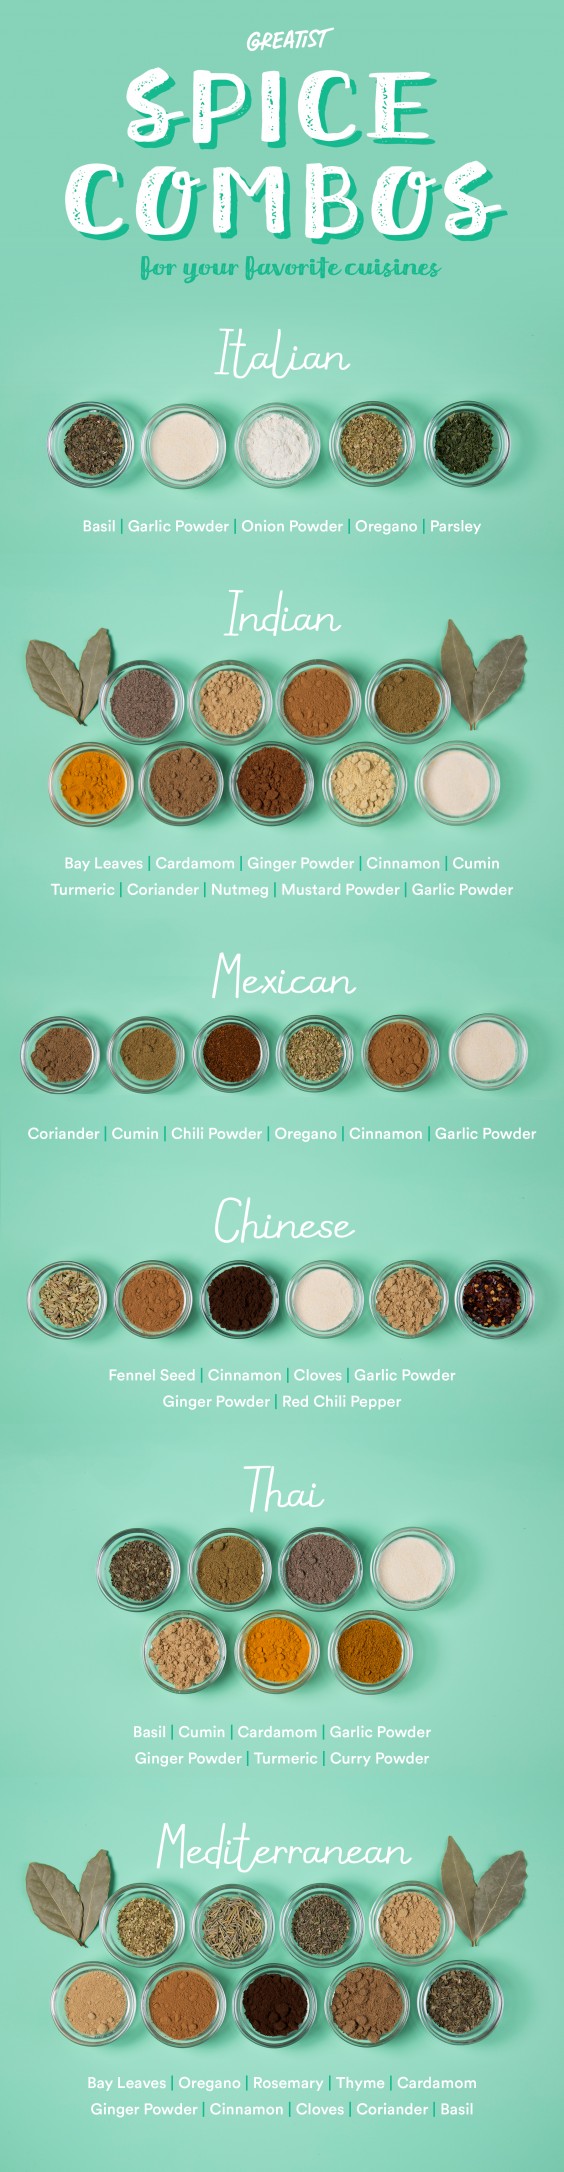 guide to spices